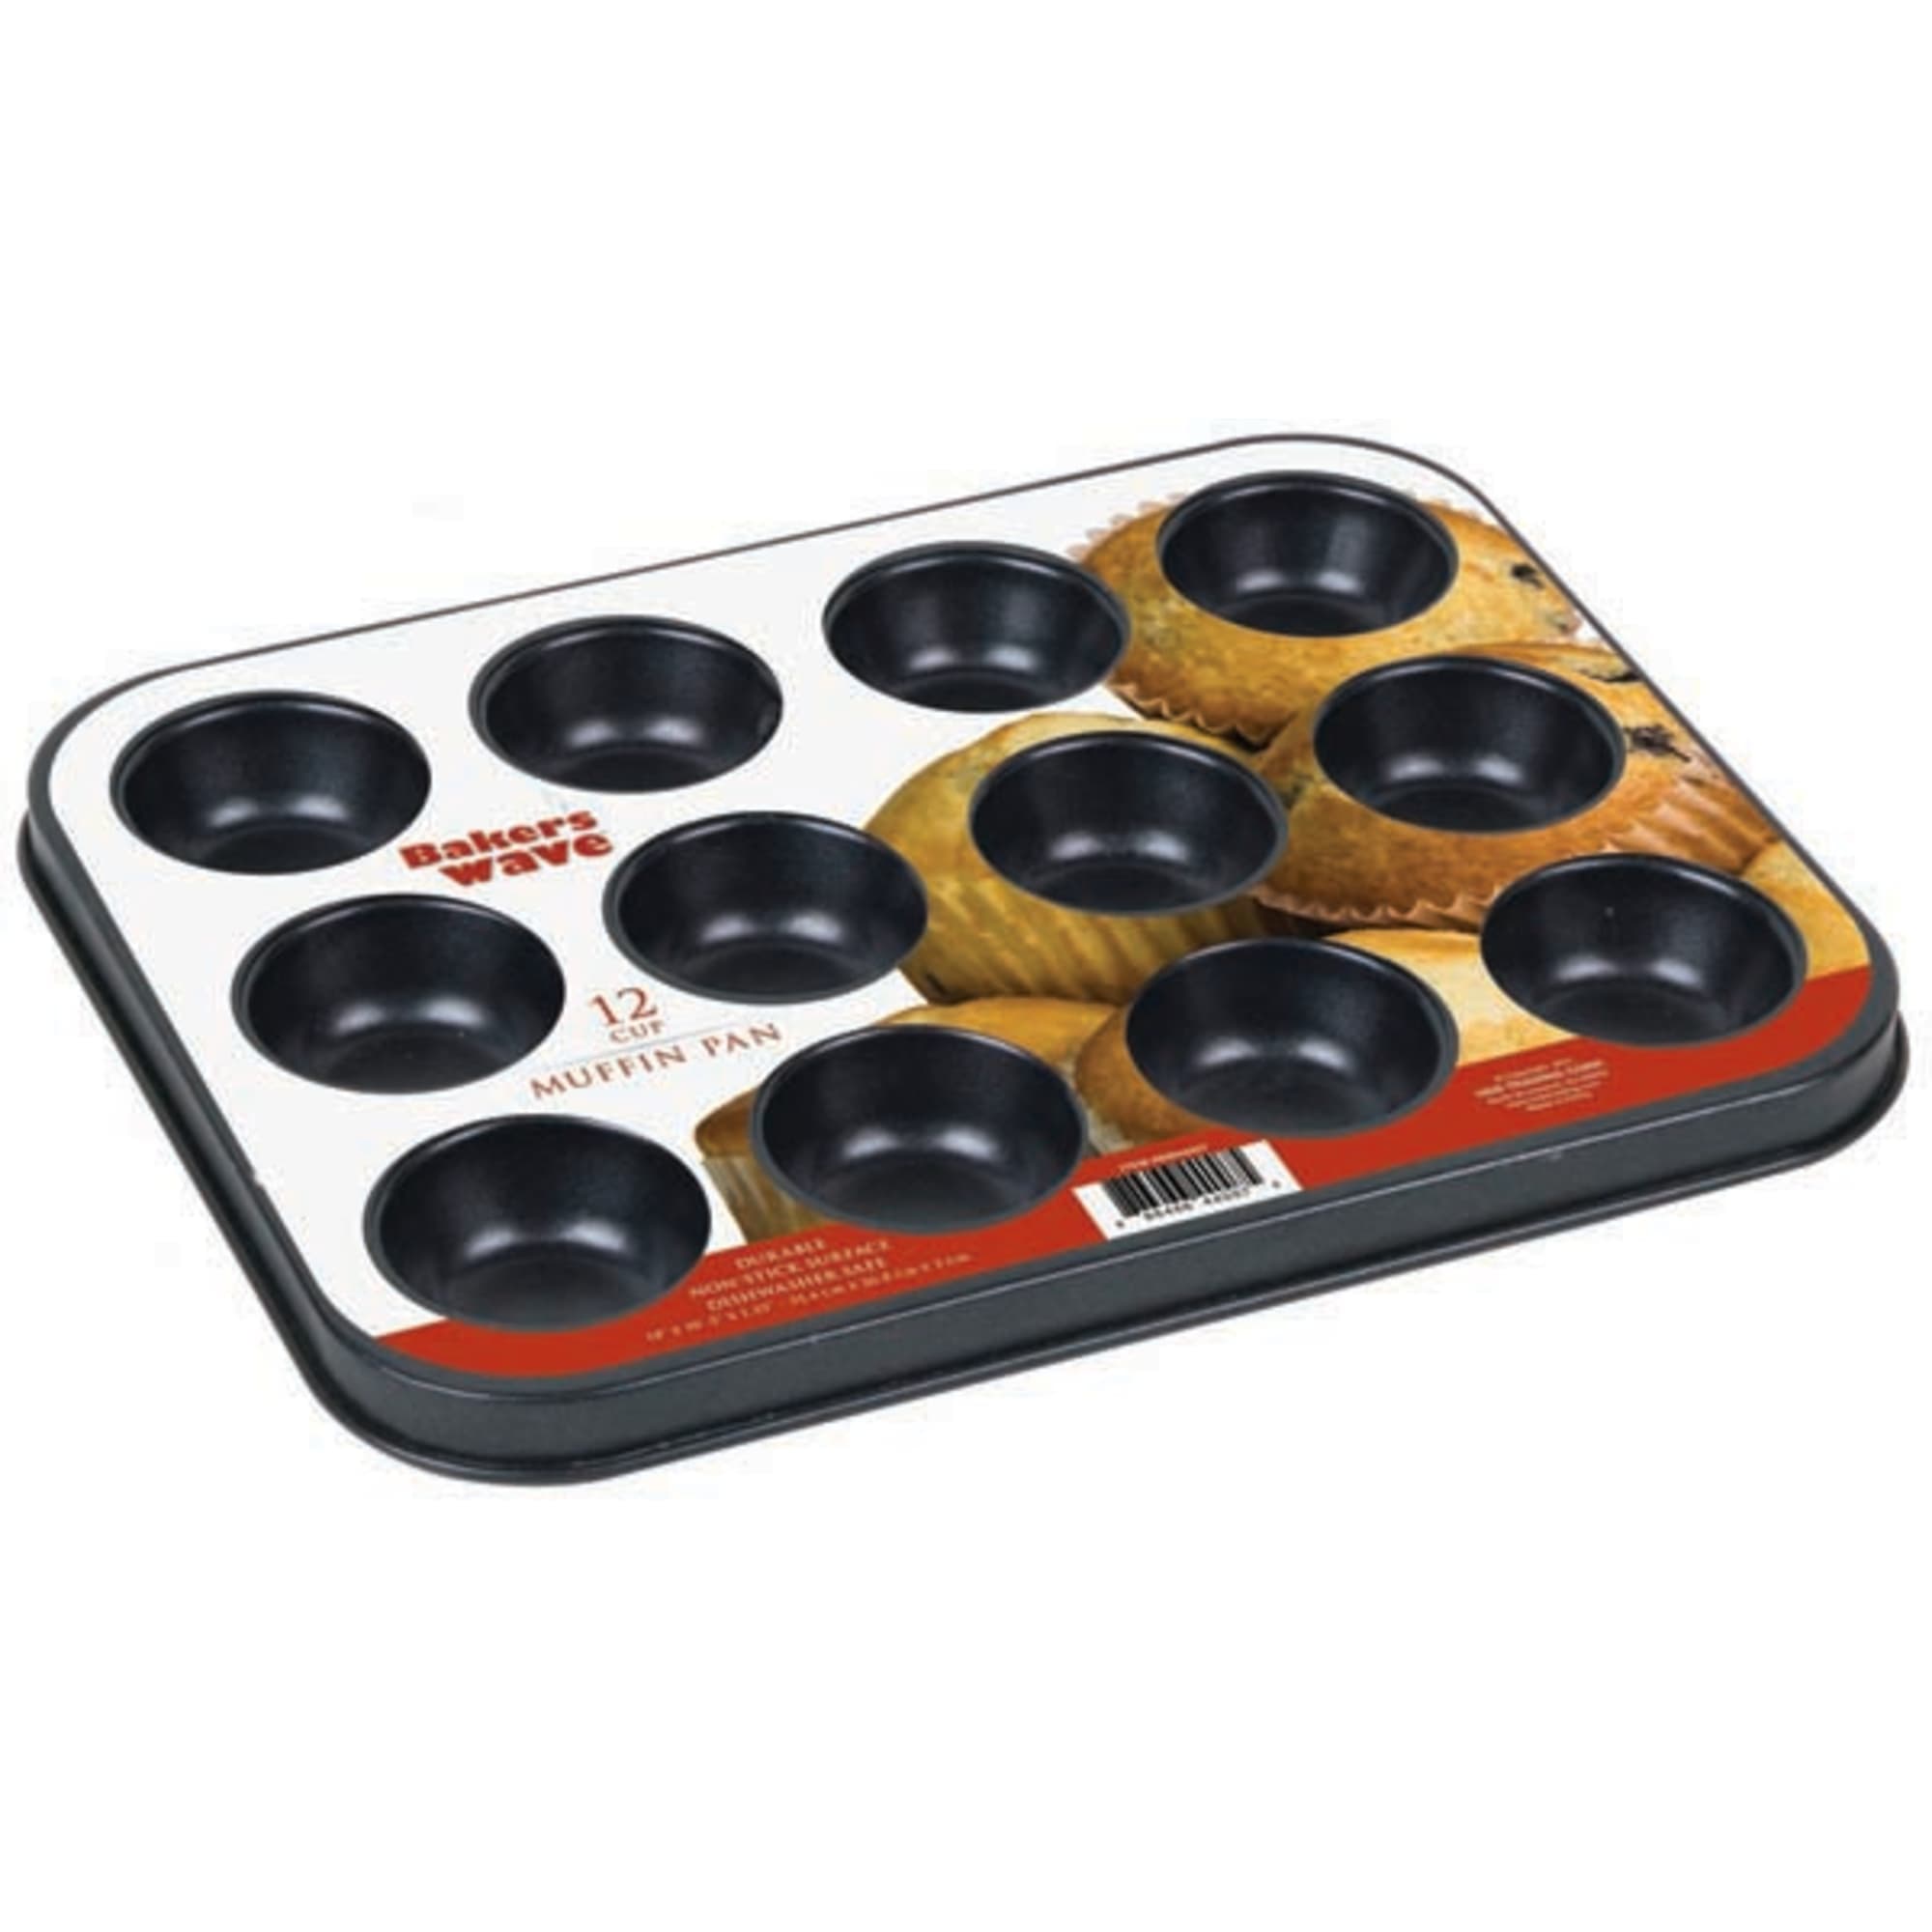 Home Basics Non-Stick 12 Cup Muffin Pan $6.00 EACH, CASE PACK OF 24